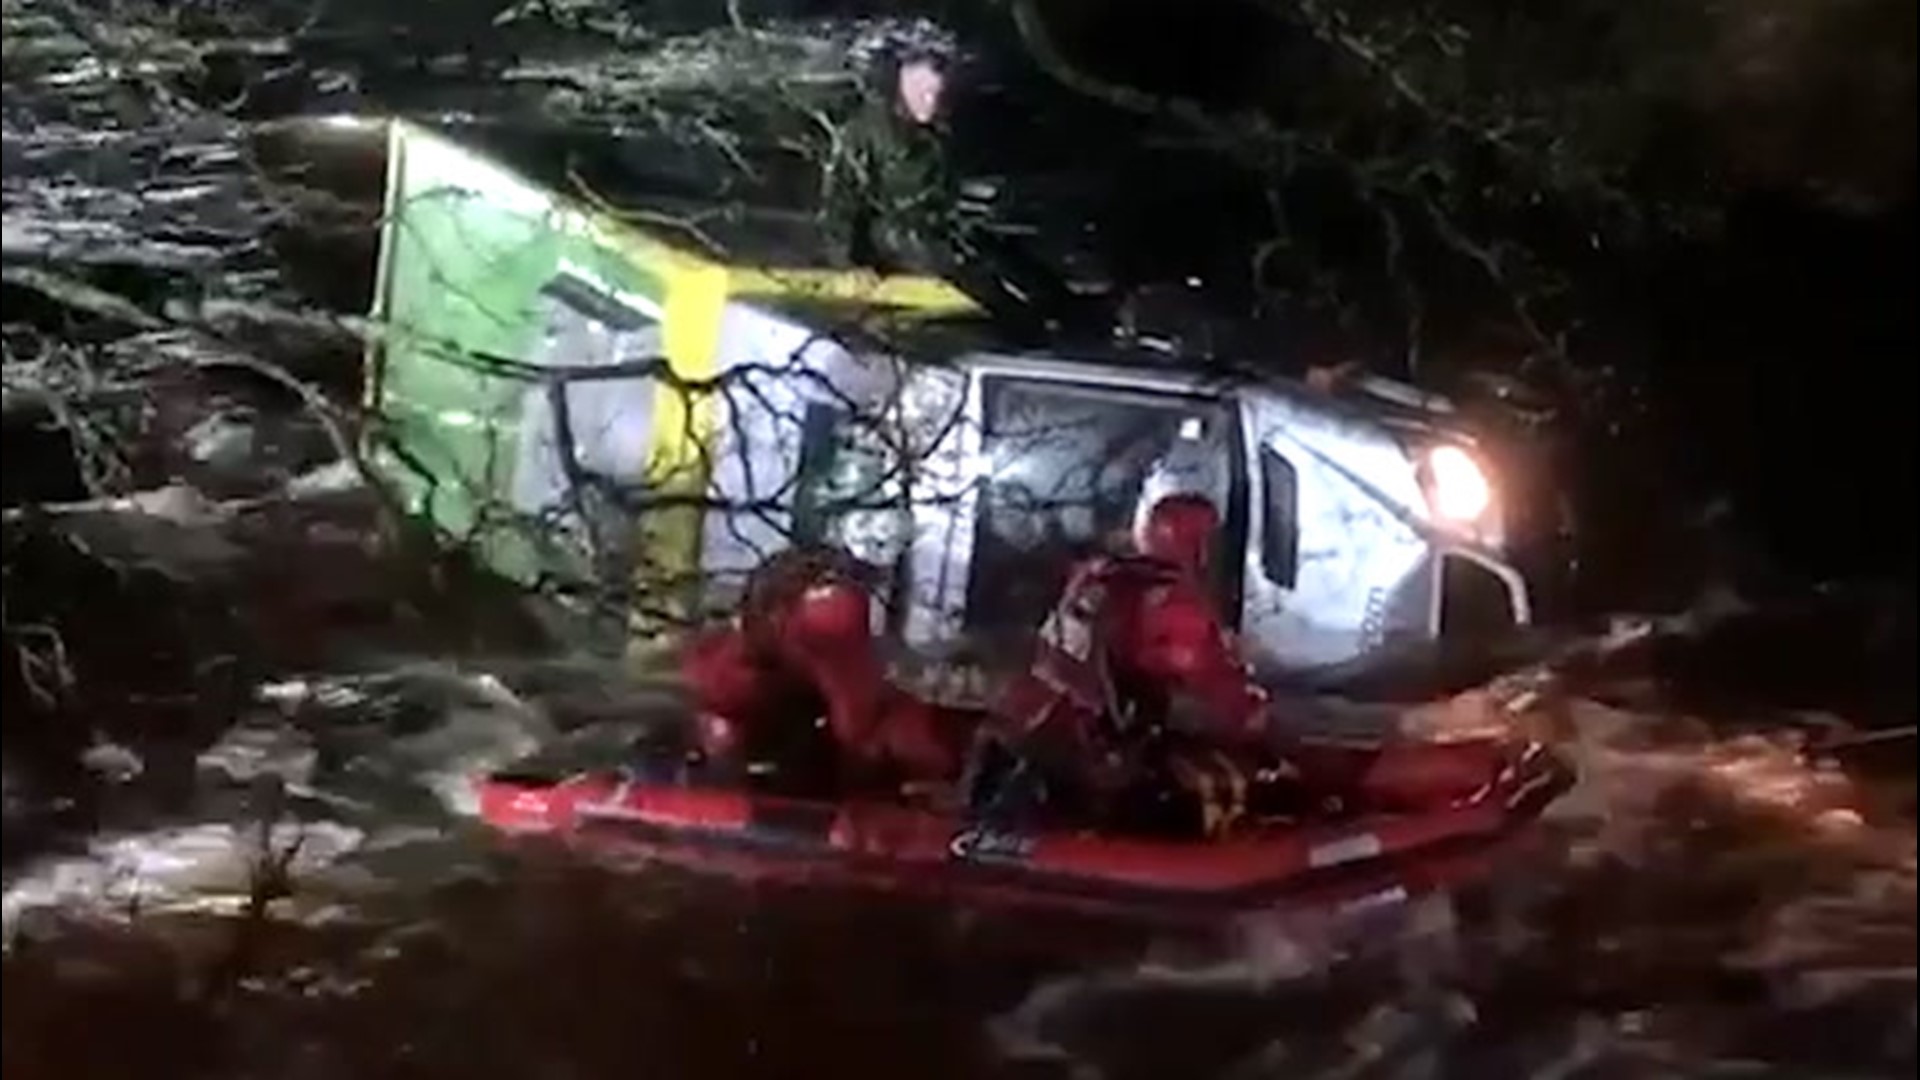 A delivery driver found himself trapped after his truck ended up overturned in a fast-moving river in Westgate, England, on Jan. 19. Fire crews rushed to the scene and rescued him.